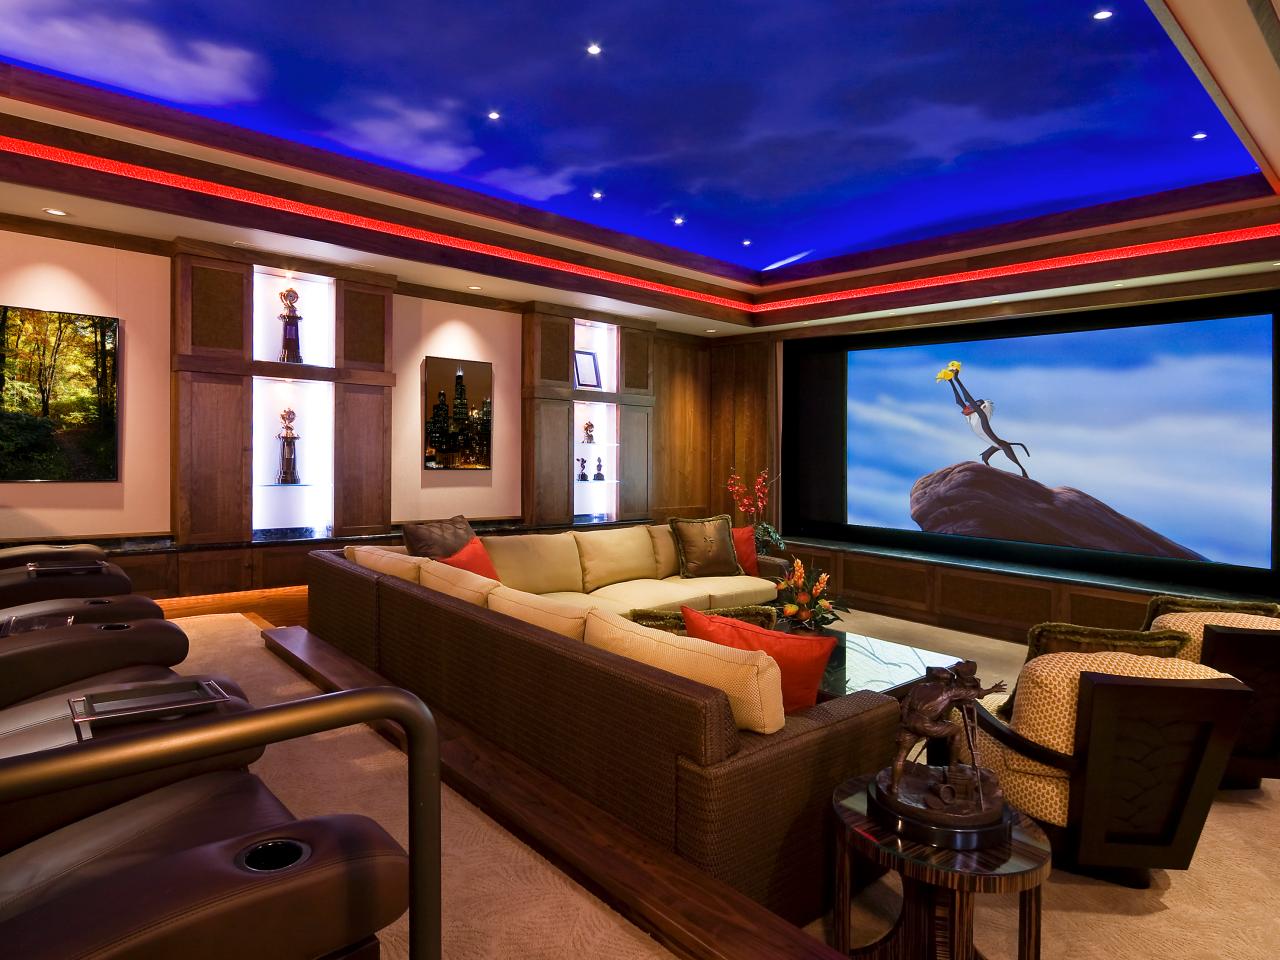 Choosing A Room For Home Theater Hgtv - How To Decorate Home Theater Room